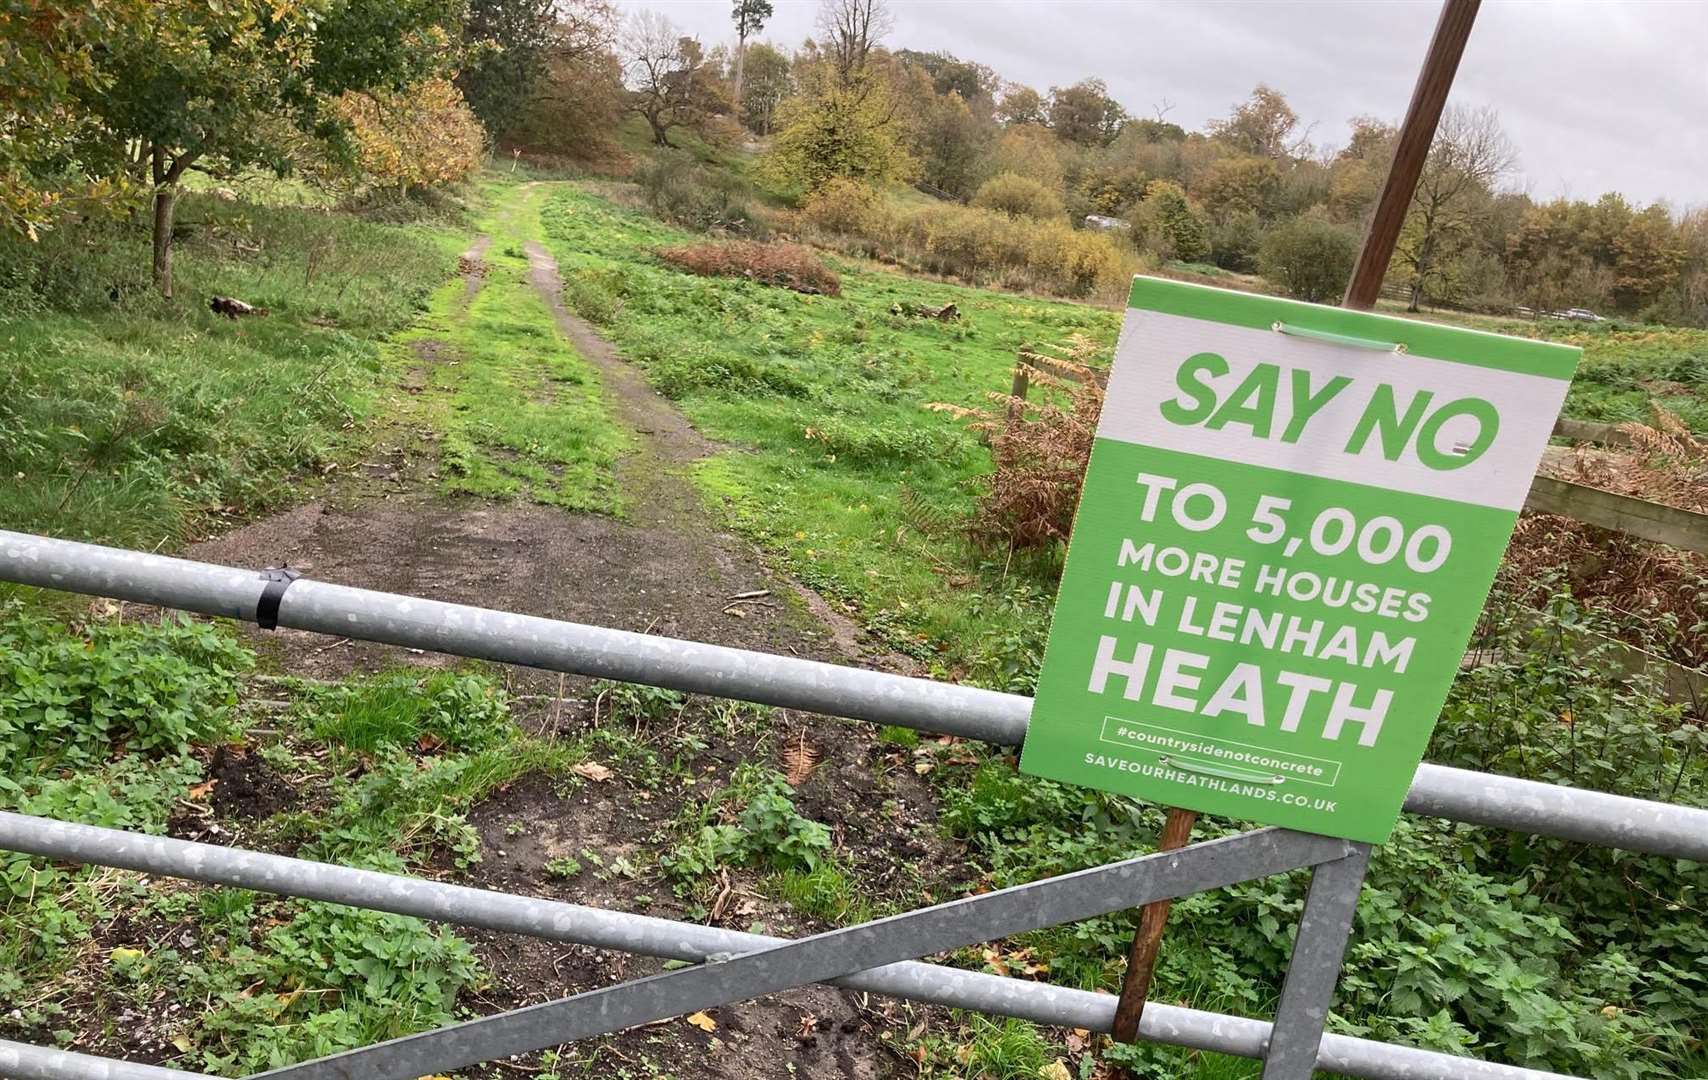 One of the many signs saying "no" to 5,000 homes at Lenham Heath